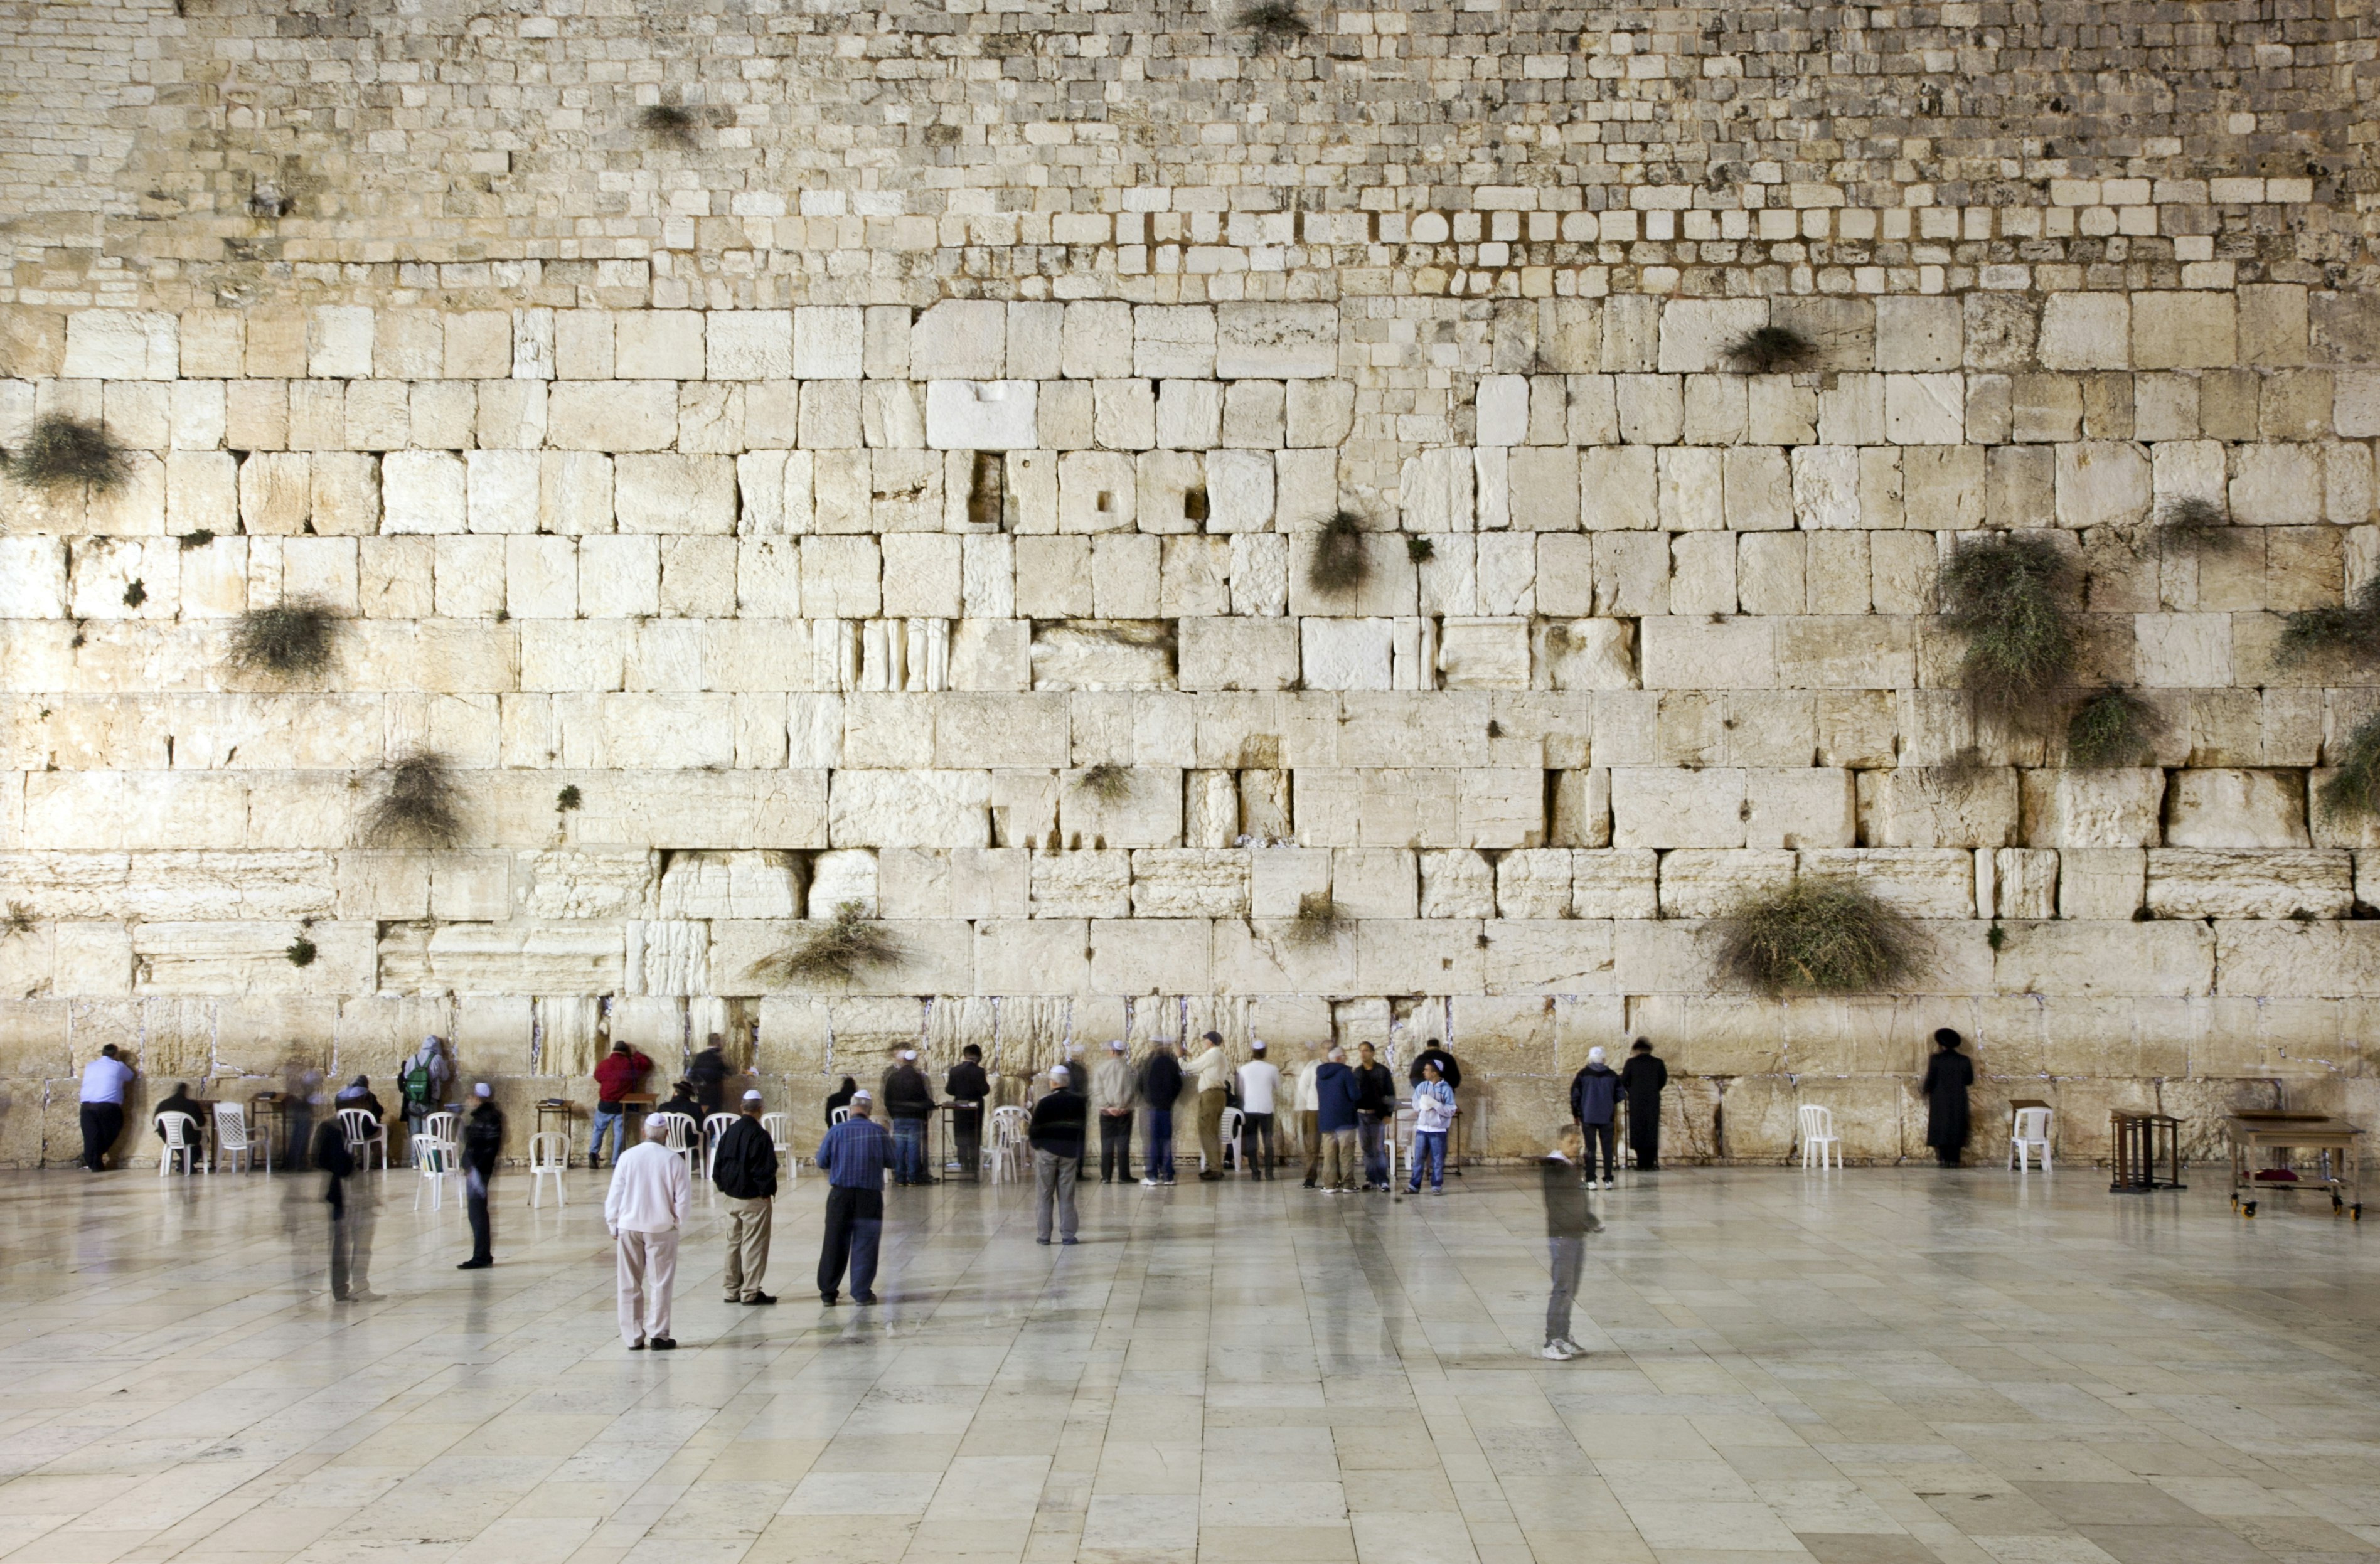 People prays and walk in front of the western wall, wailing wall or kotel.